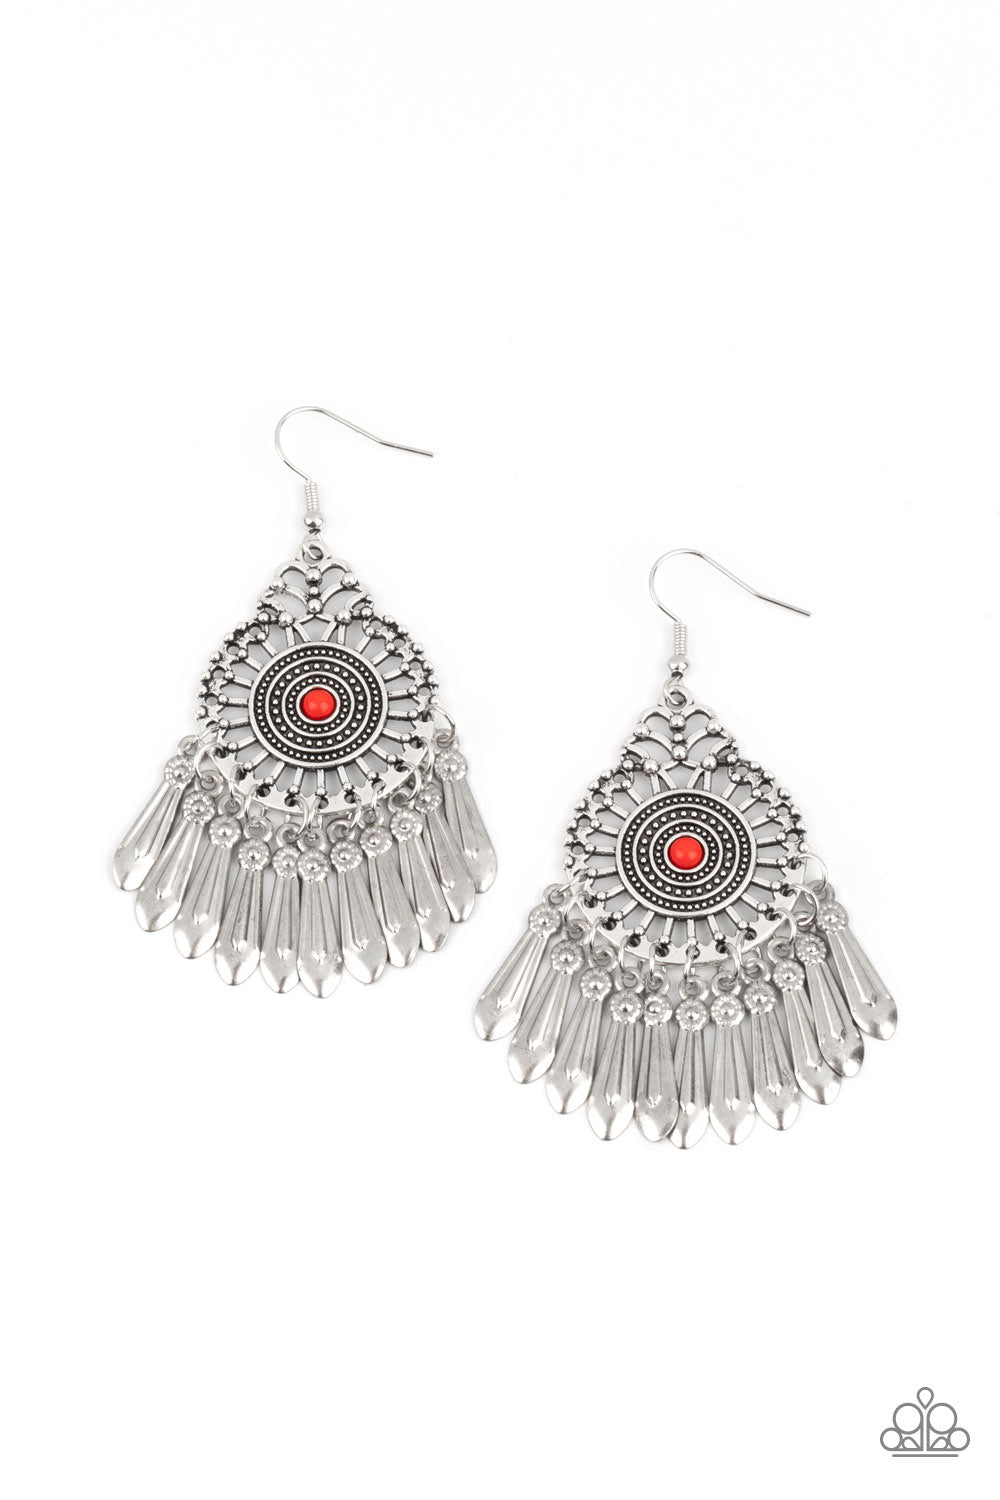 Dream a Little DREAMCATCHER Red and Silver Earrings - Paparazzi Accessories- lightbox - CarasShop.com - $5 Jewelry by Cara Jewels